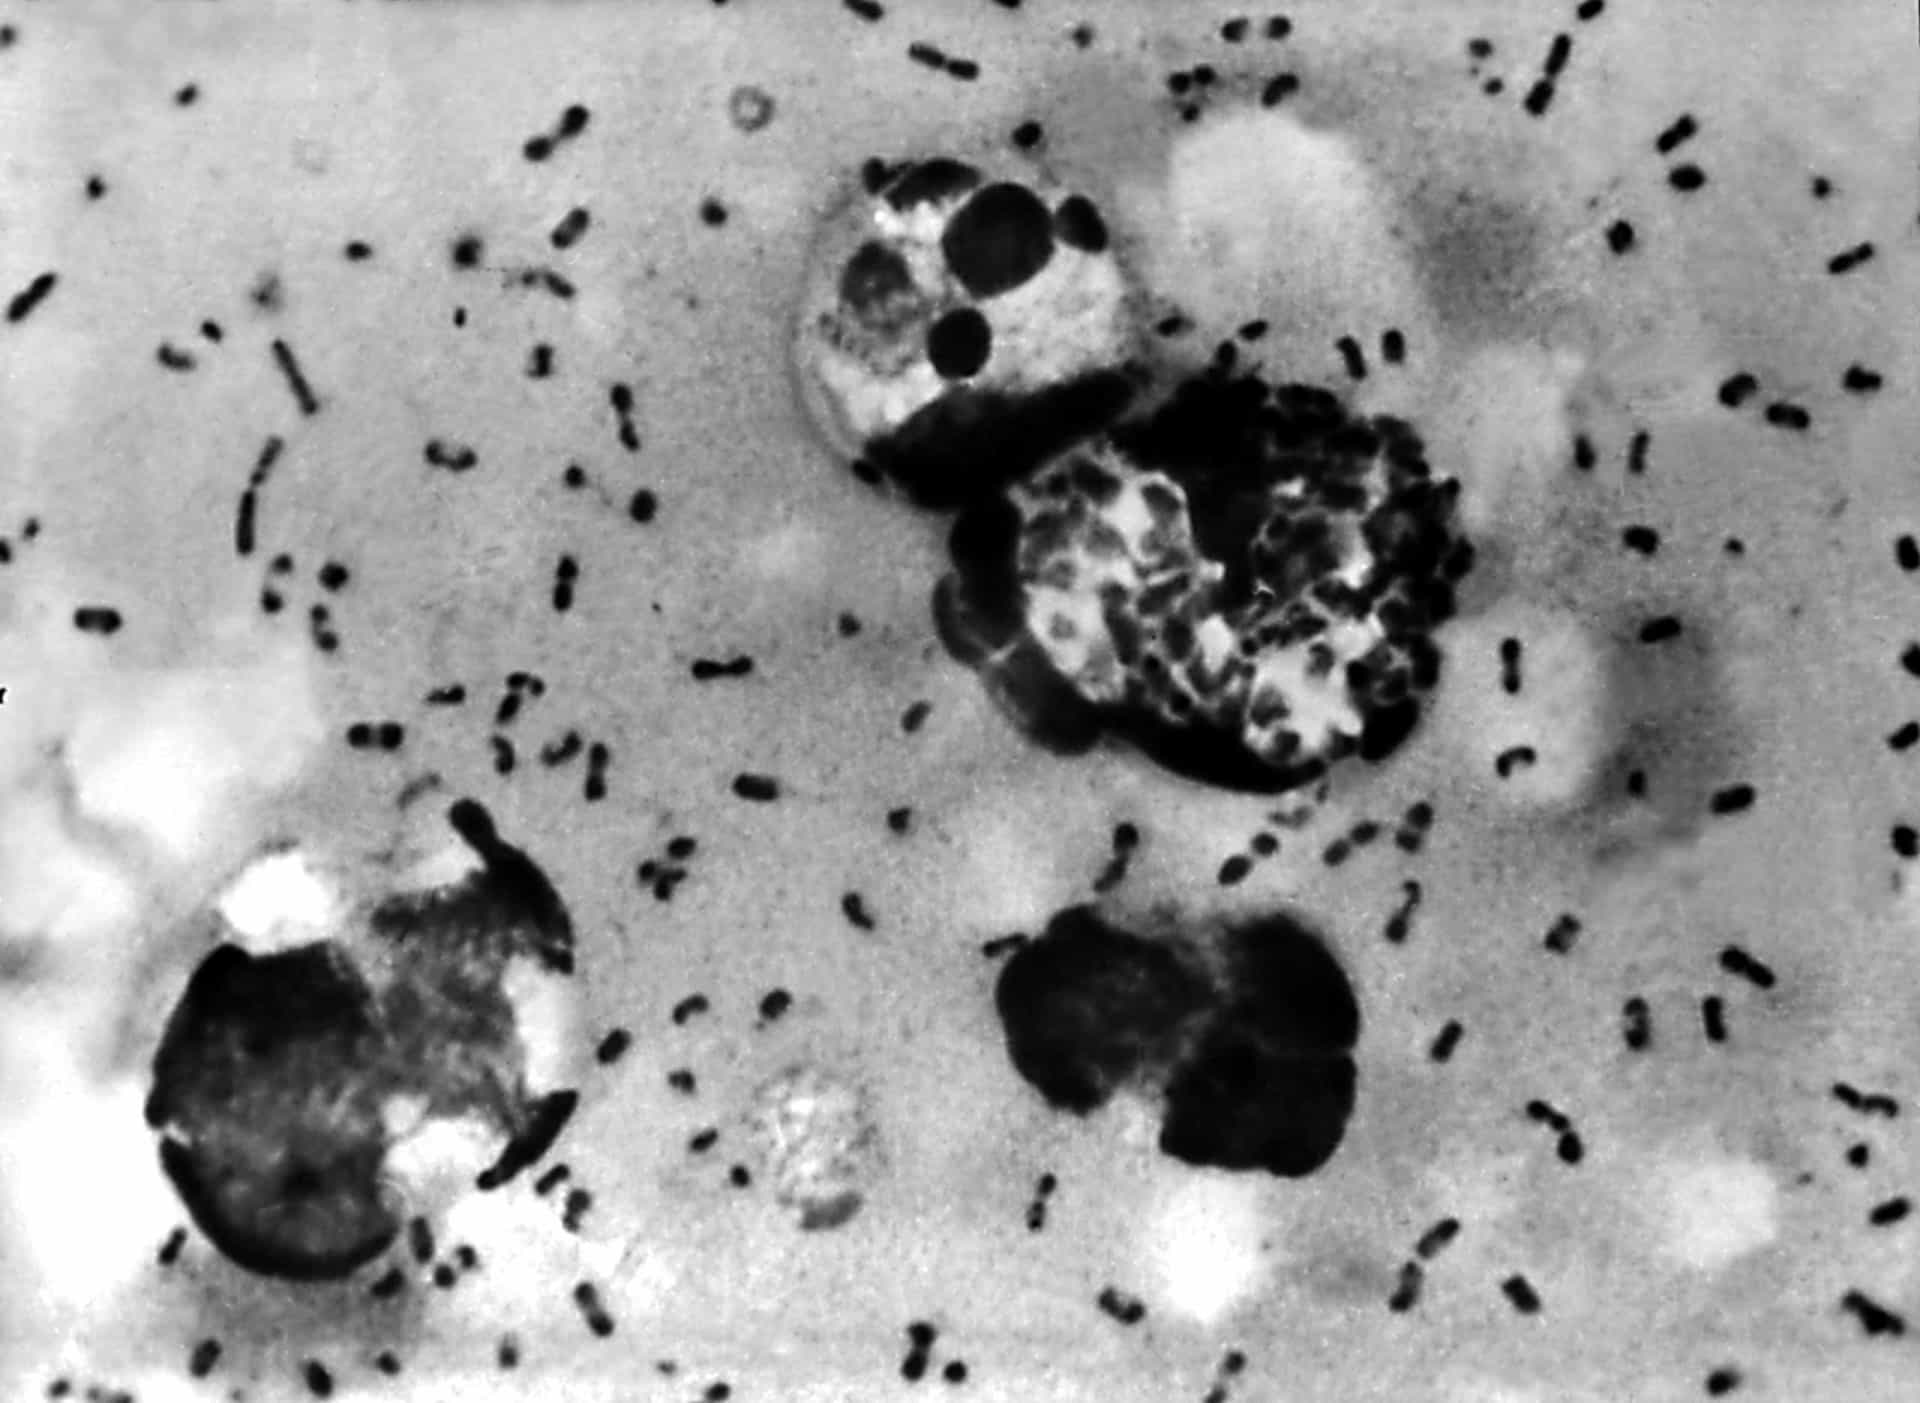 <p>The Black Death was the deadliest pandemic ever recorded. It signaled the start of the Second Pandemic, a chain of tragic outbreaks that occurred from the 1300s to the early 1800s. Yersinia pestis or Y. pestis, a bacterium, was responsible for this bubonic plague.</p>